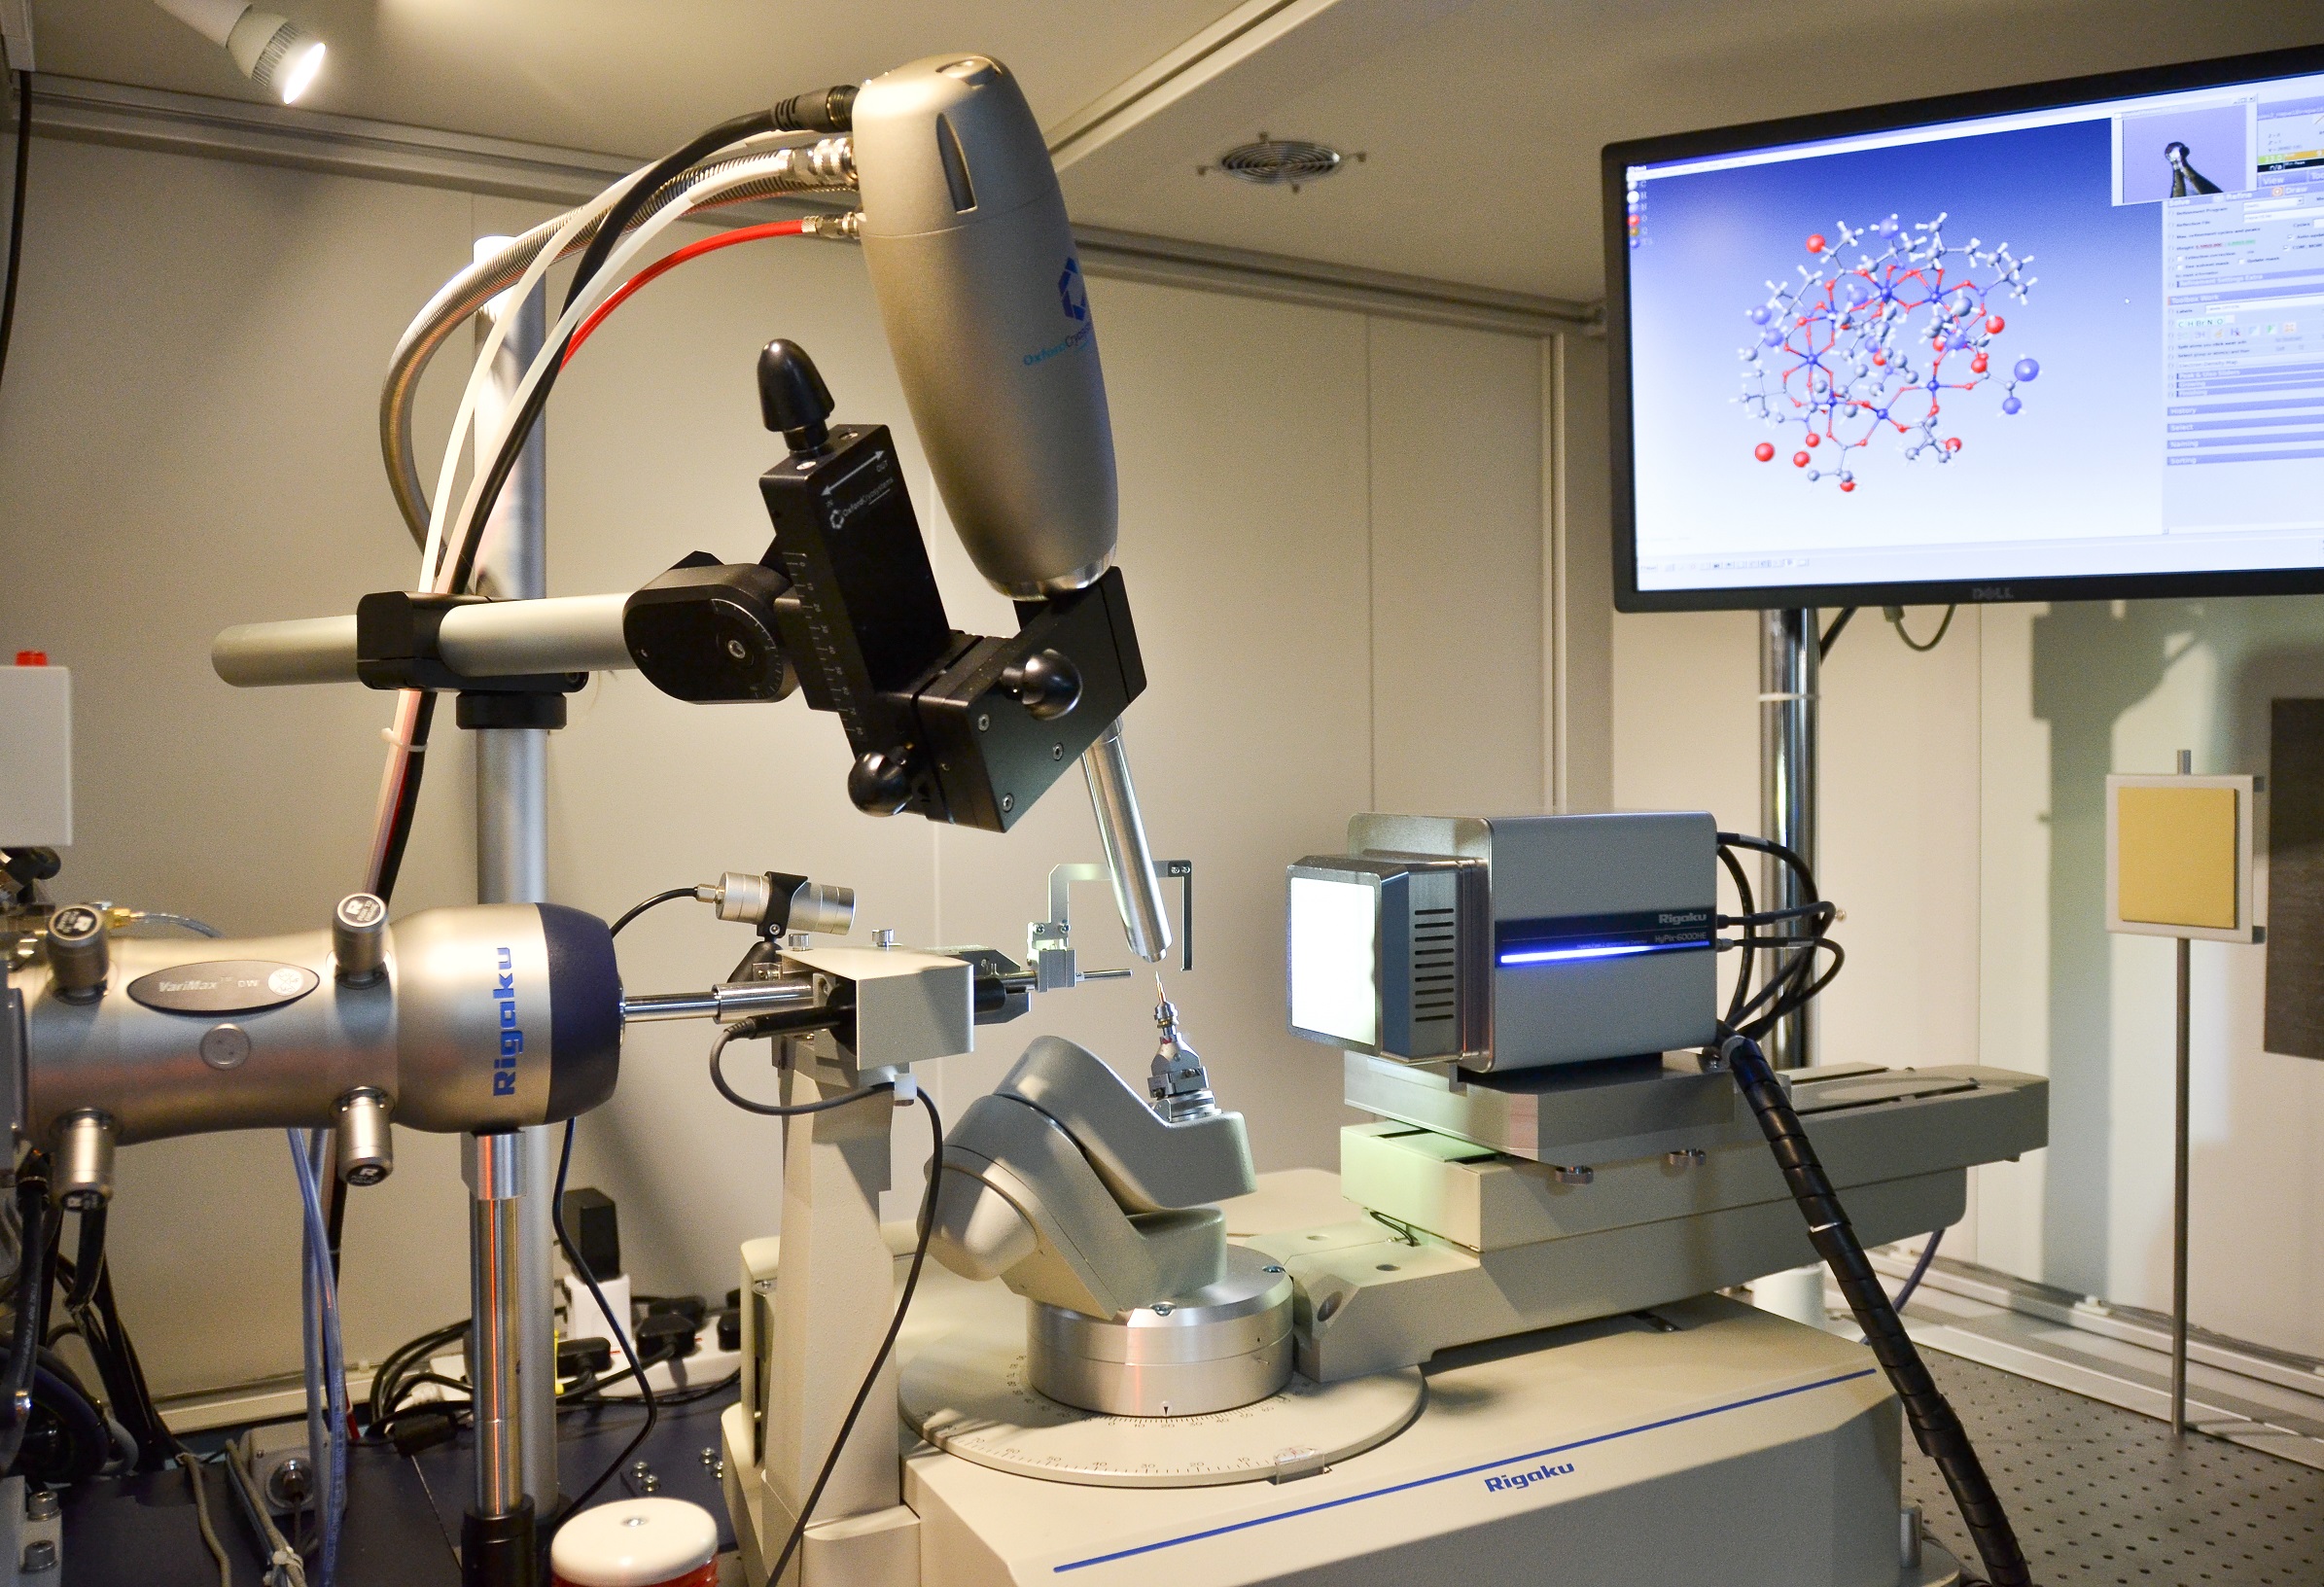 Rigaku XtaLAB FR-X DW X-ray diffractometer system in the School of Chemistry at the University of Manchester